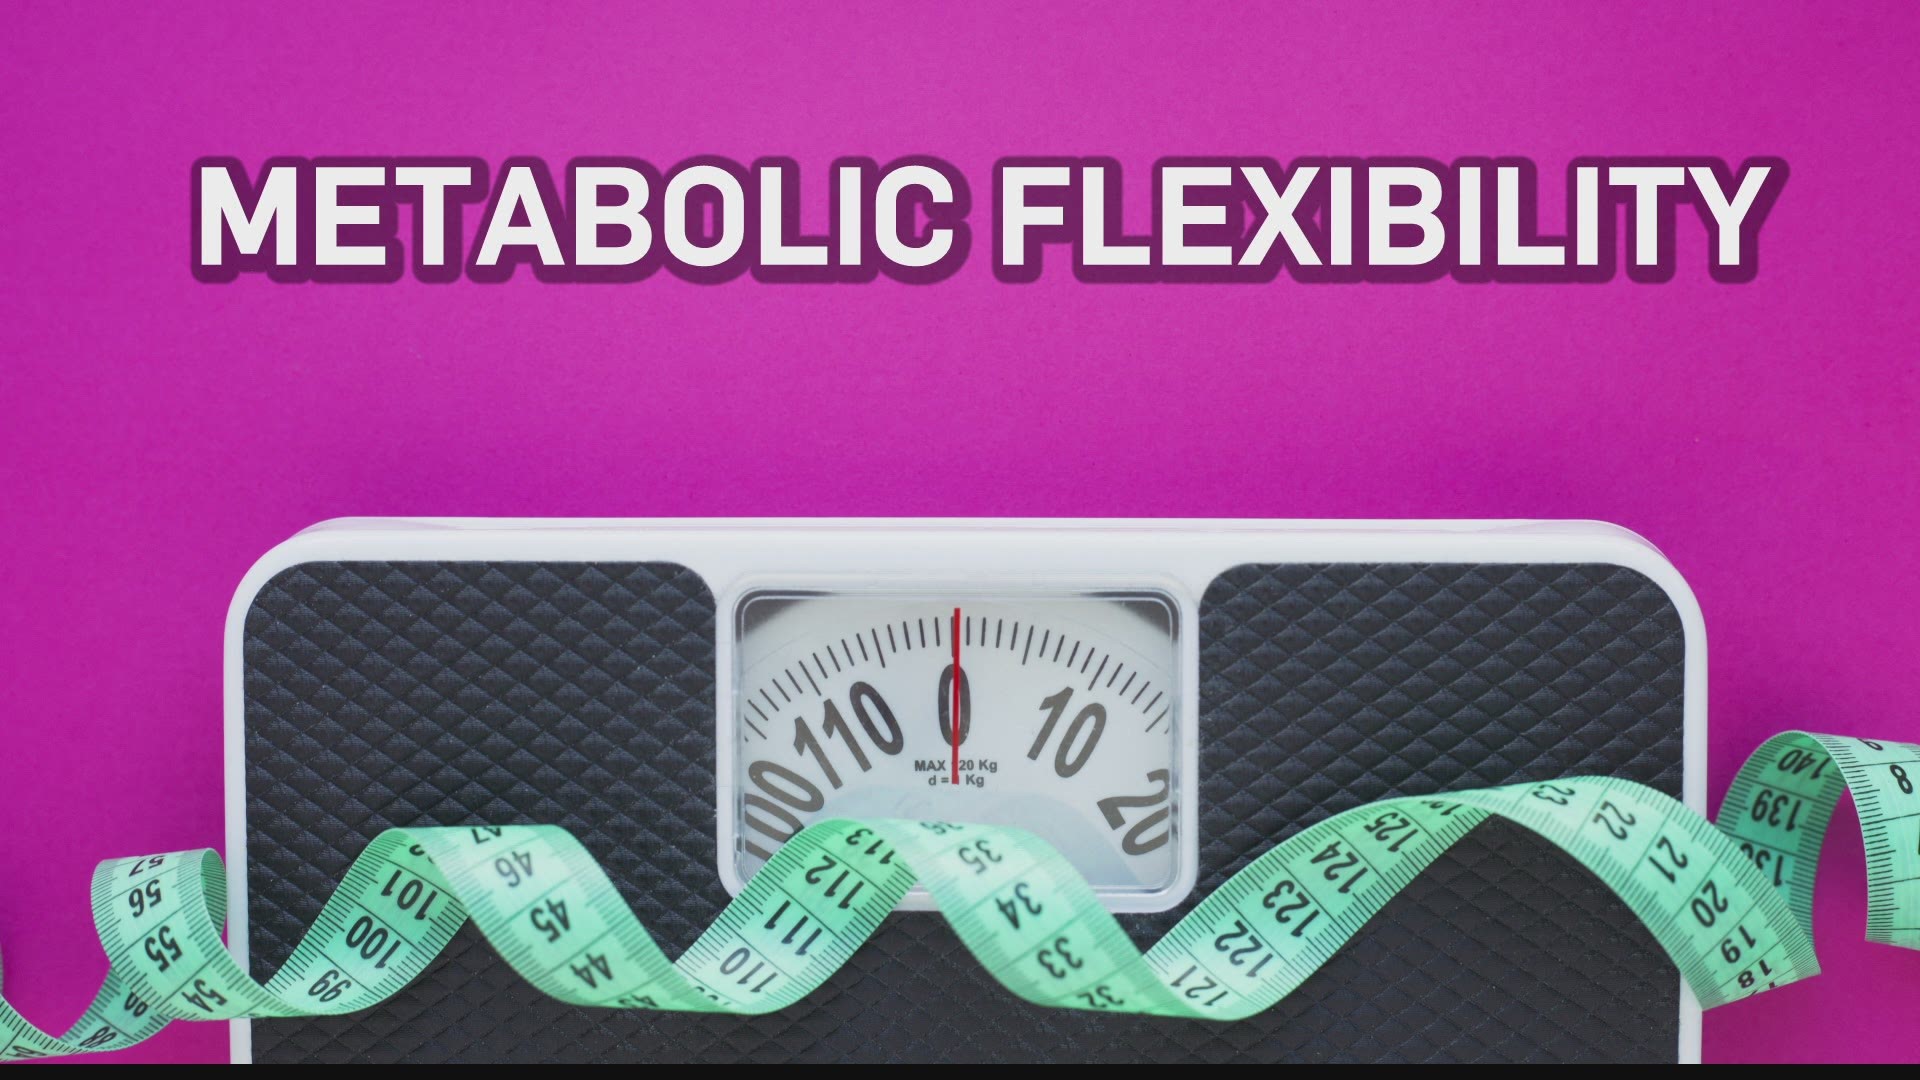 Healthy Living Expert Erica Ballard explains why metabolic flexibility is critical to burn fat effectively to lose weight quickly.